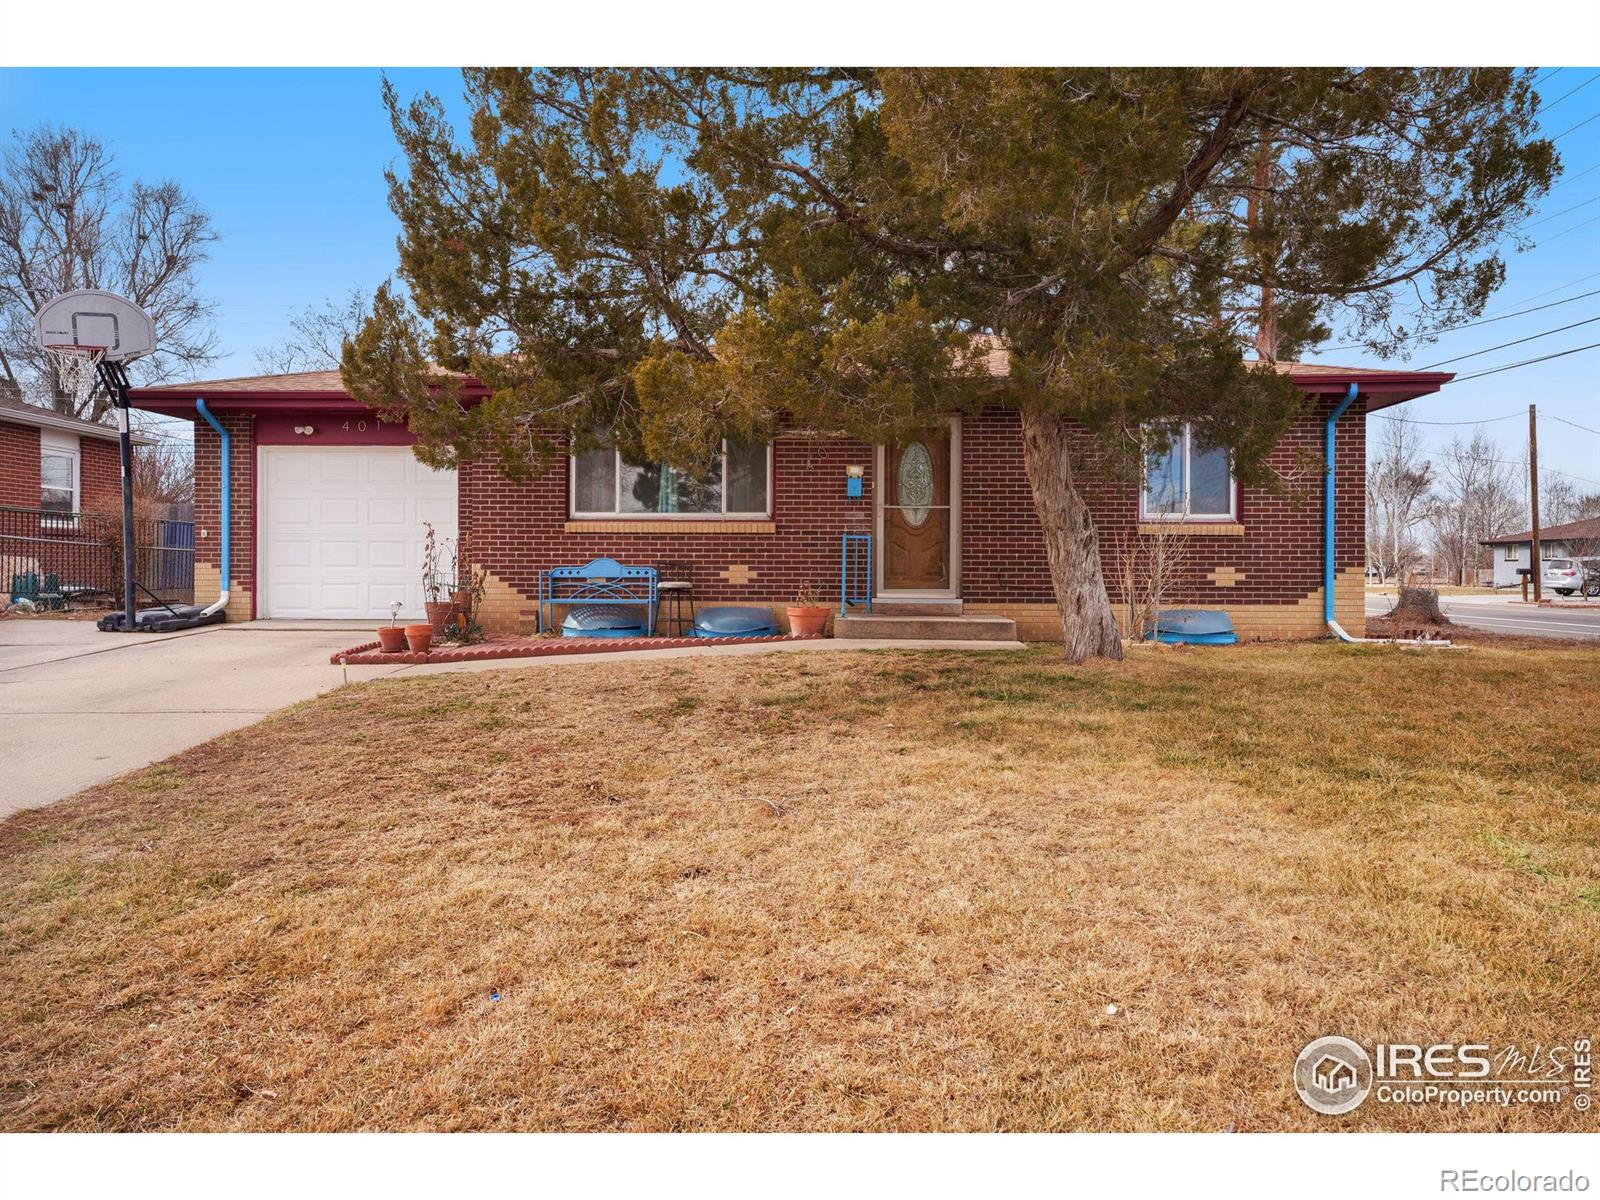 401  27th Avenue, greeley MLS: 4567891002744 Beds: 4 Baths: 2 Price: $369,500